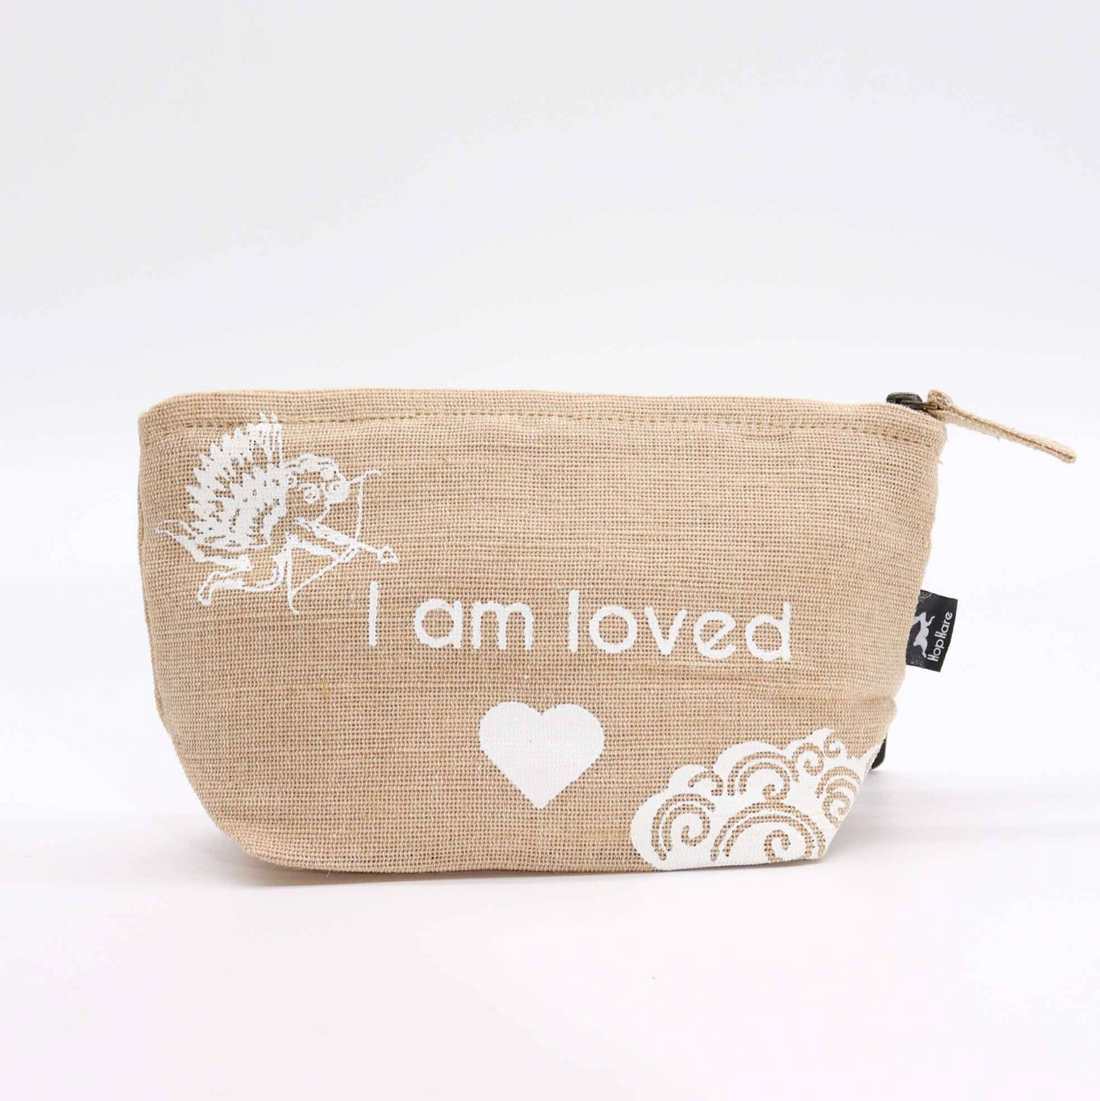 I am Loved - Hop Hare Pouch